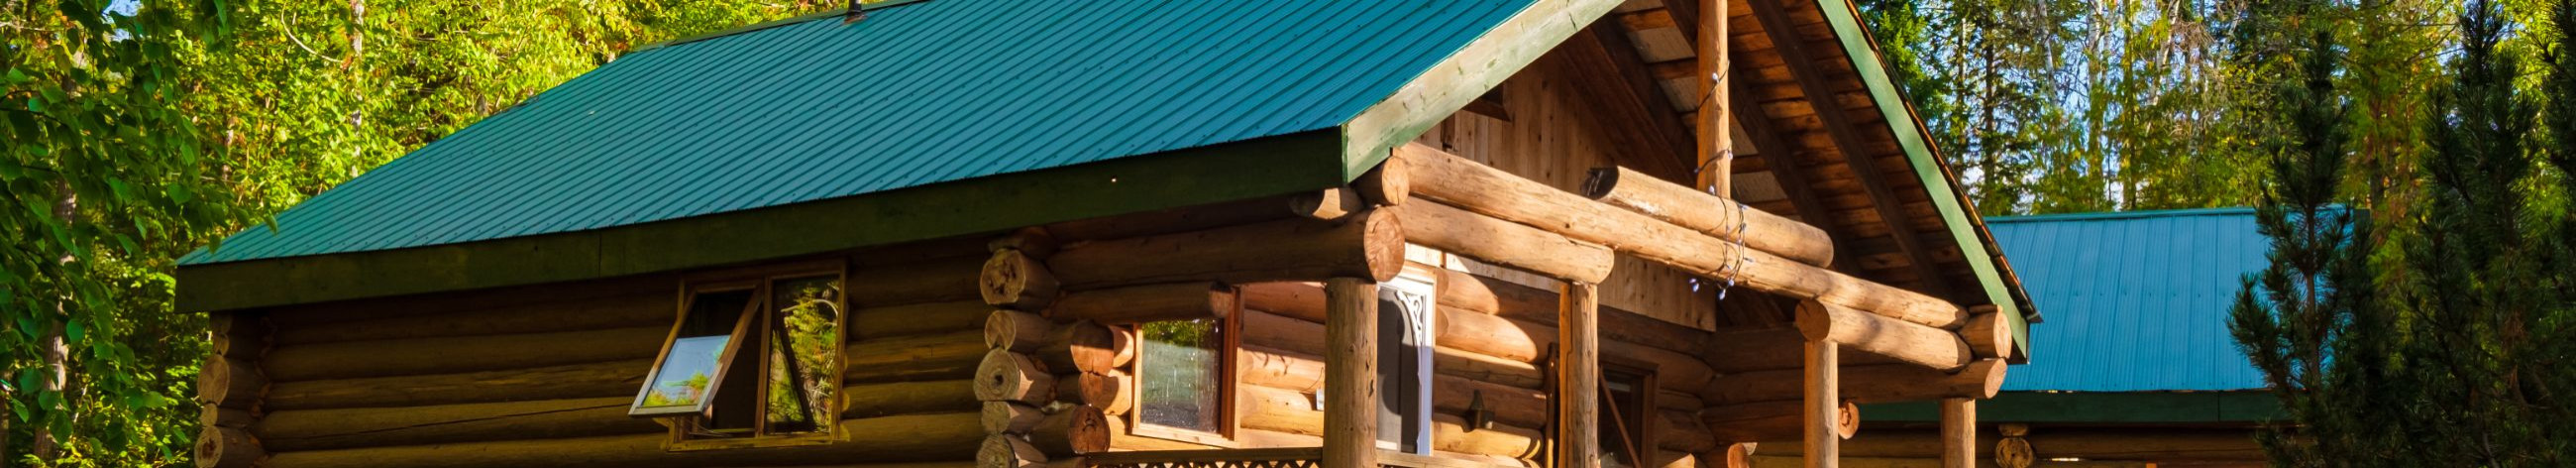 We specialize in constructing log buildings, selling sawn timber, and offering comprehensive construction services.